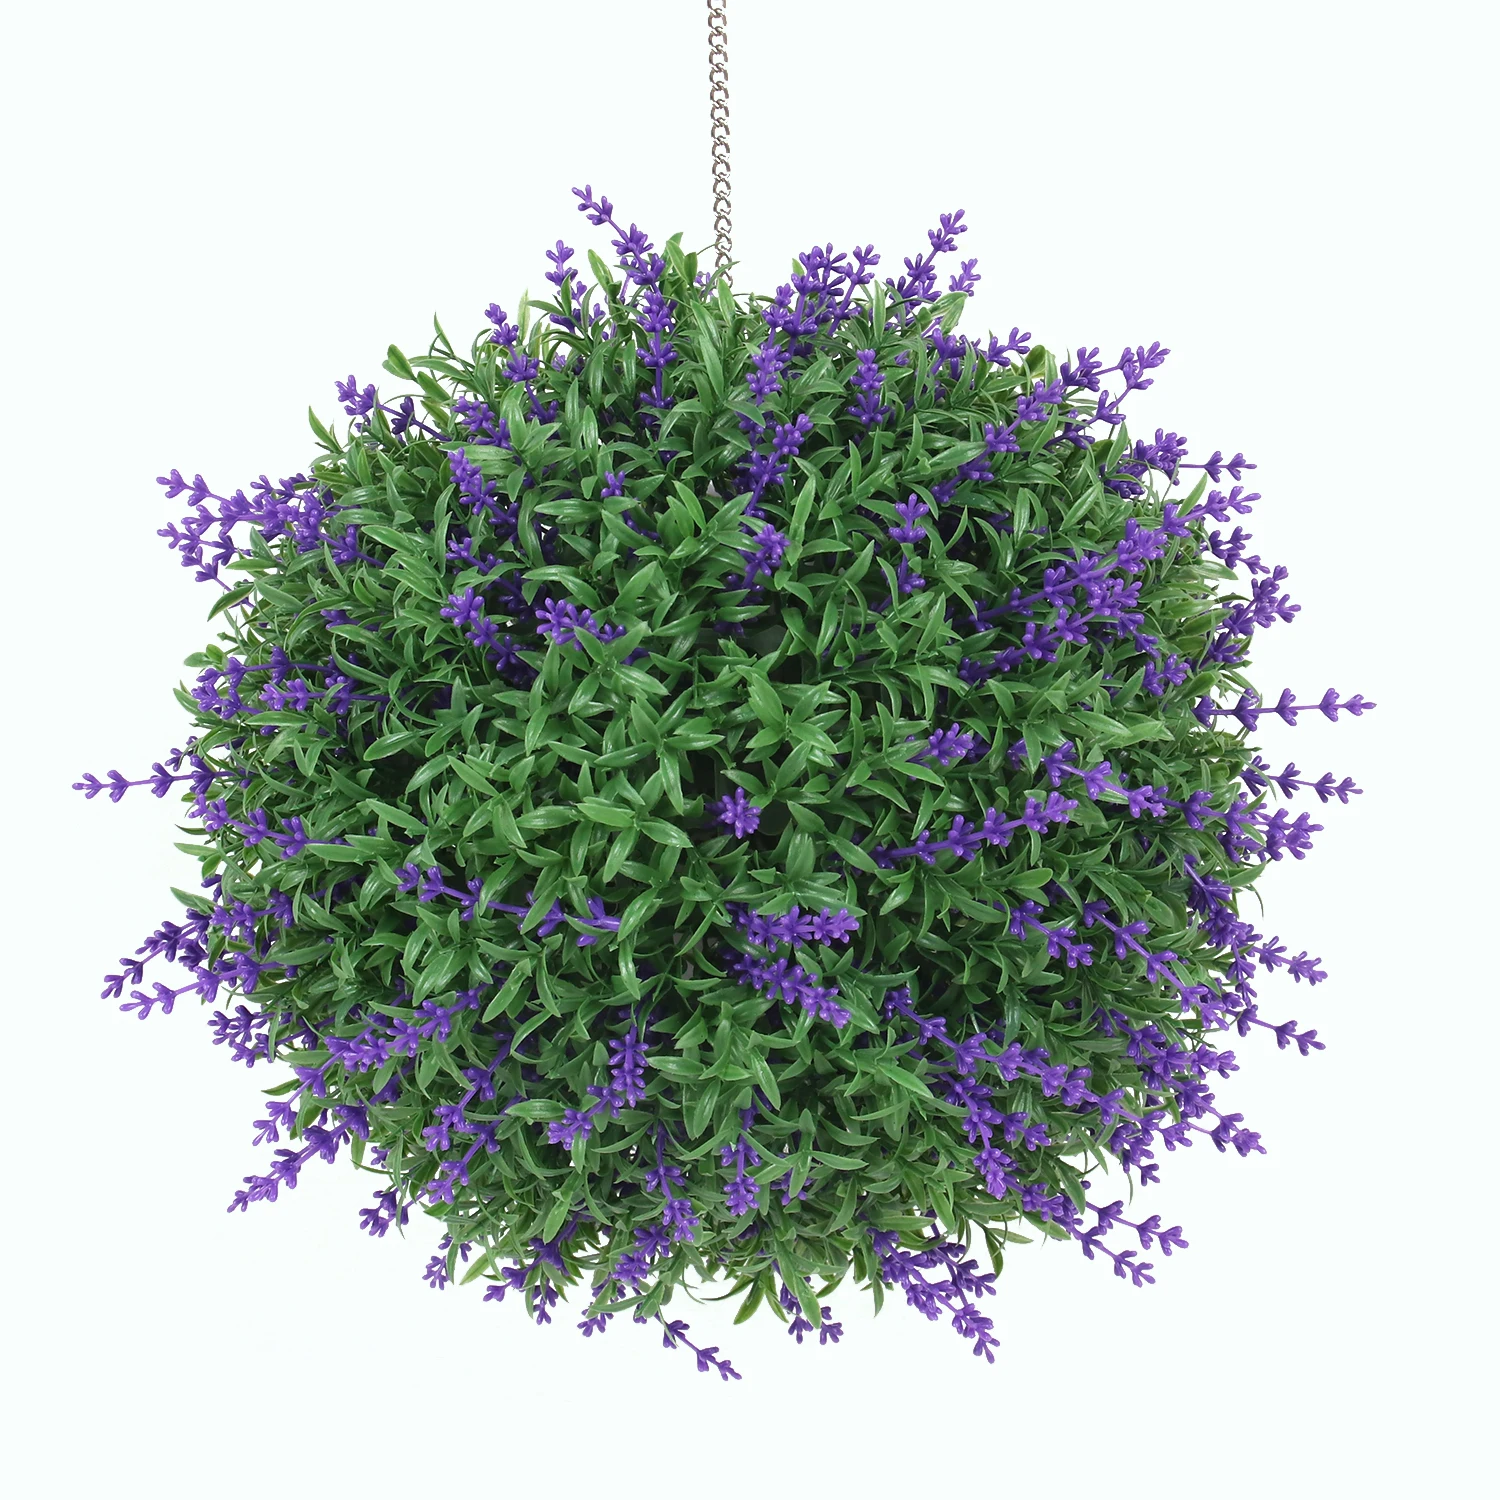 Wholesale Artificial Boxwood Greenery Lavender Faux Boxwood Ball For Outdoor Decor Buy Faux Boxwood Ball Outdoor Plastic Topiary Balls High Quality Artificial Grass Topiary Boxwood Balls Faux Boxwood Ball For Decor Hobby Lobby